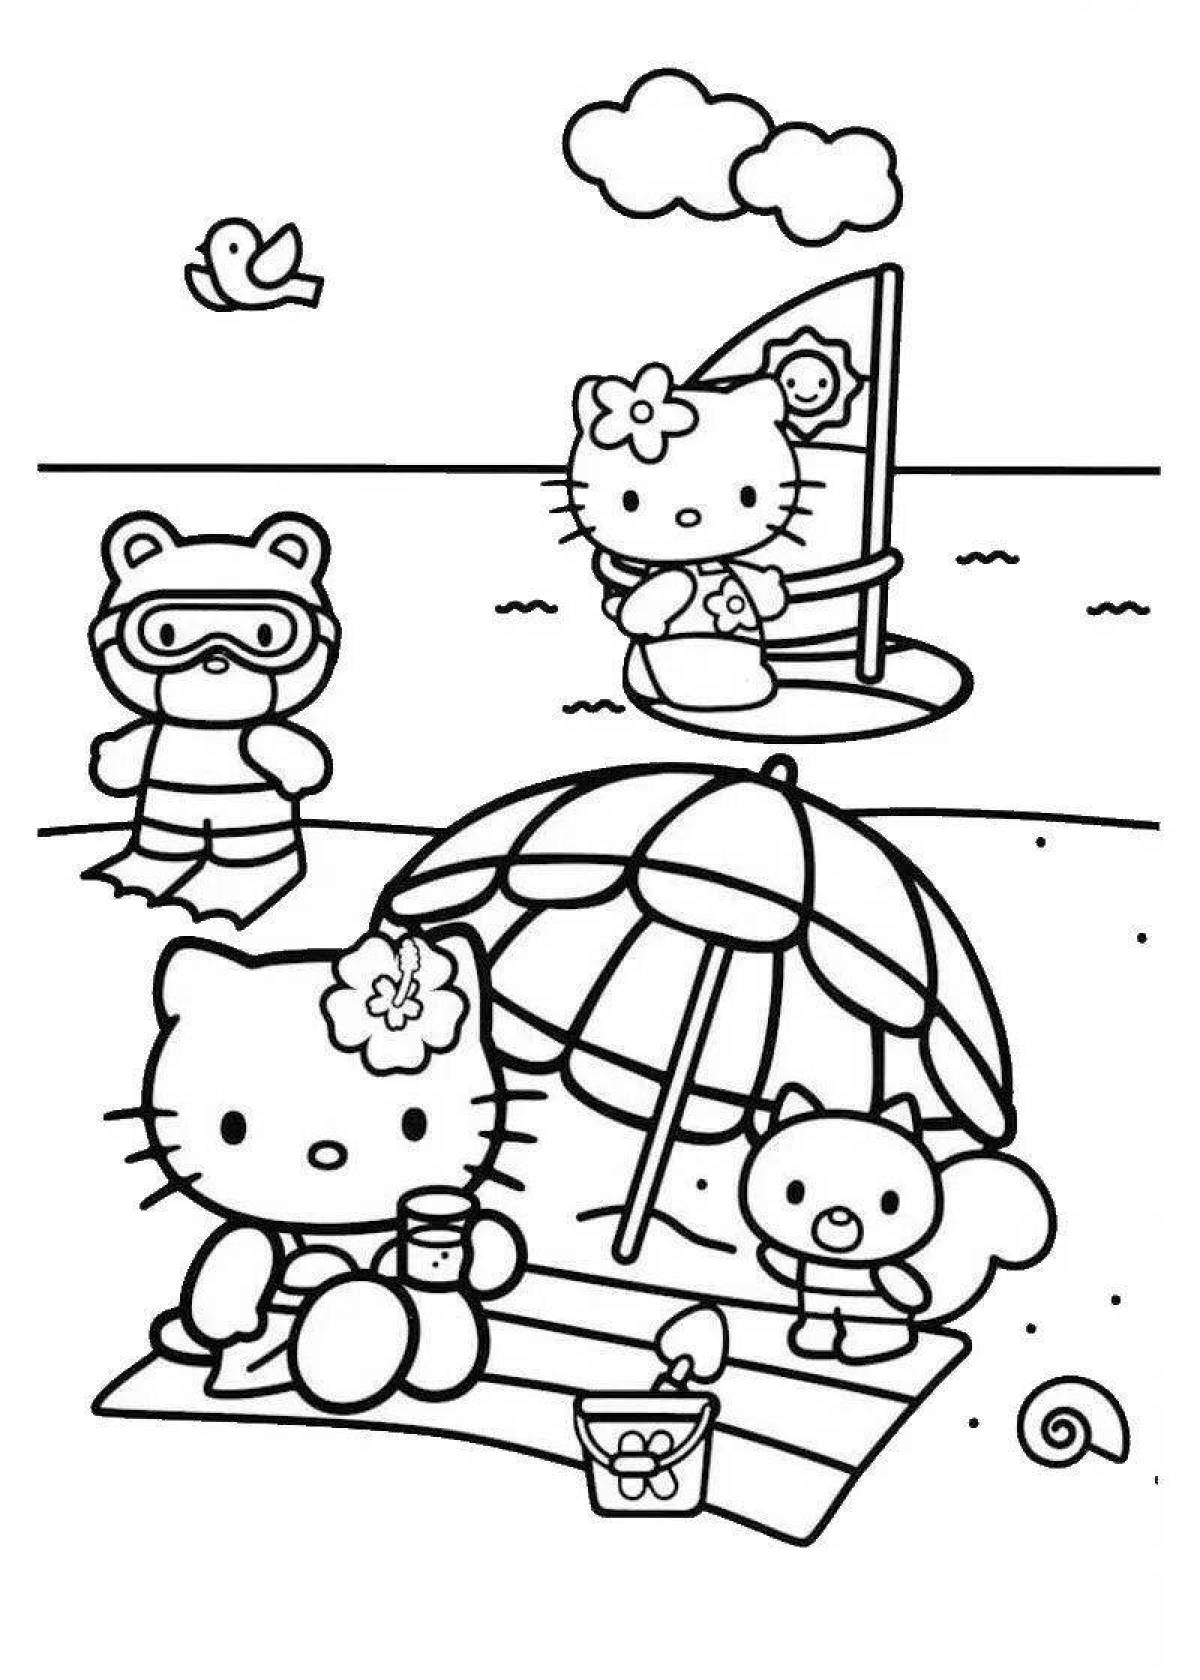 Hello kitty and her friends #6